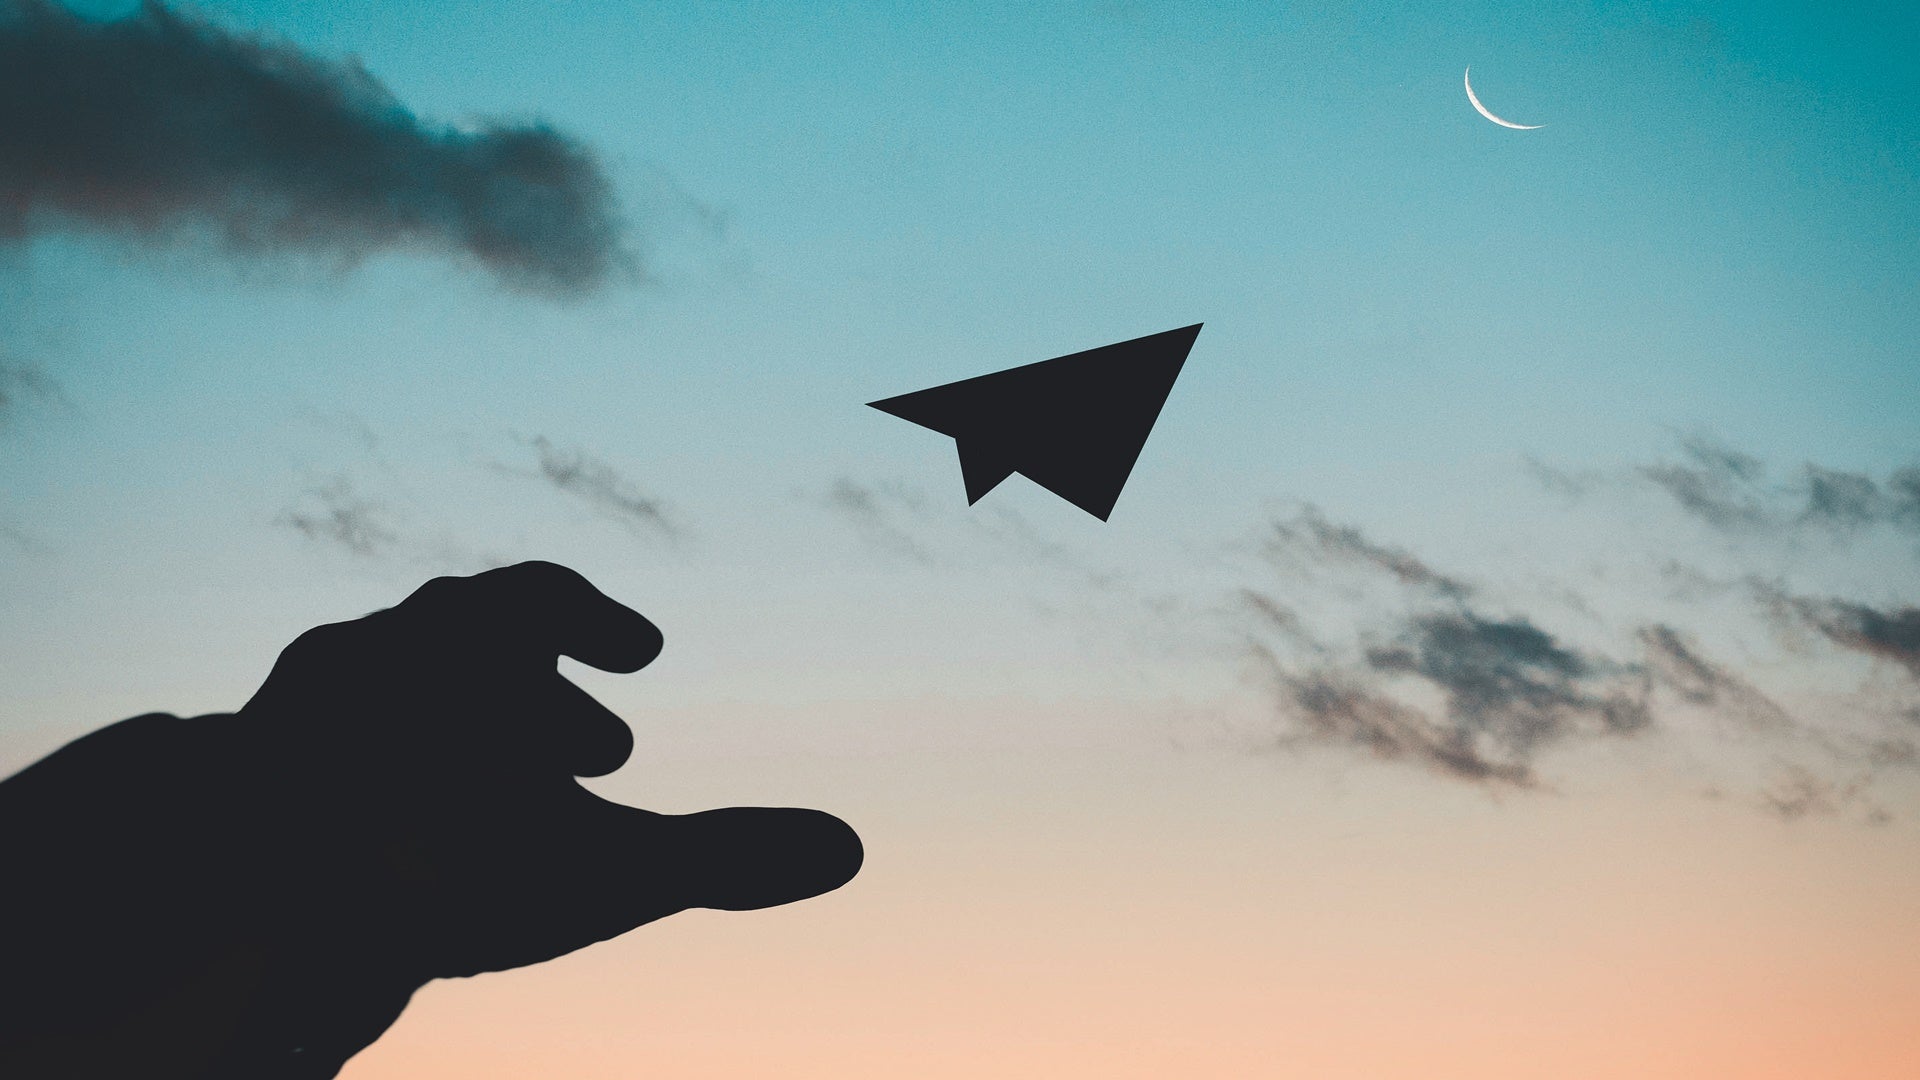 man throwing paper plane into sky / innovation concept